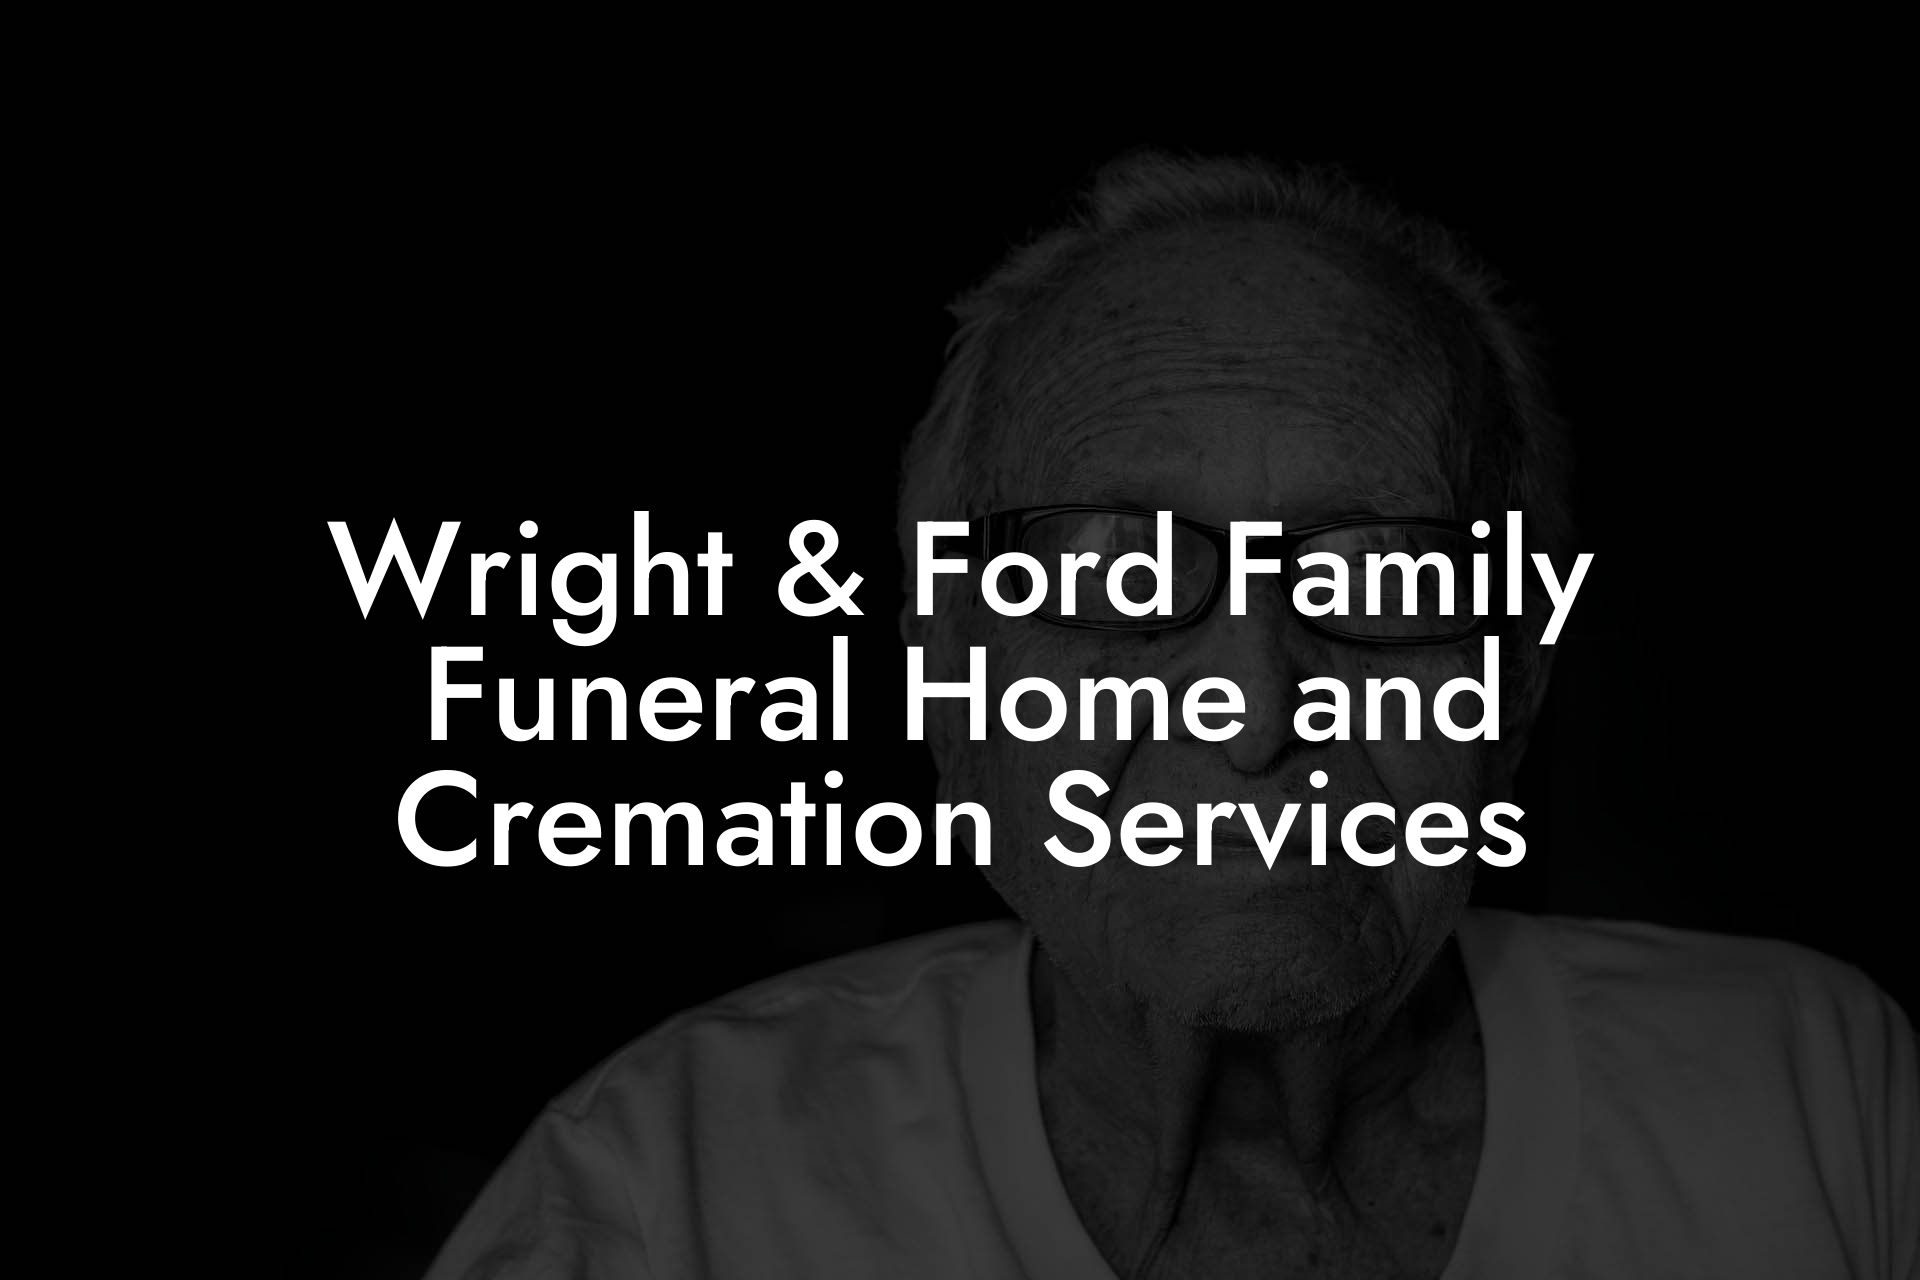 Wright & Ford Family Funeral Home and Cremation Services